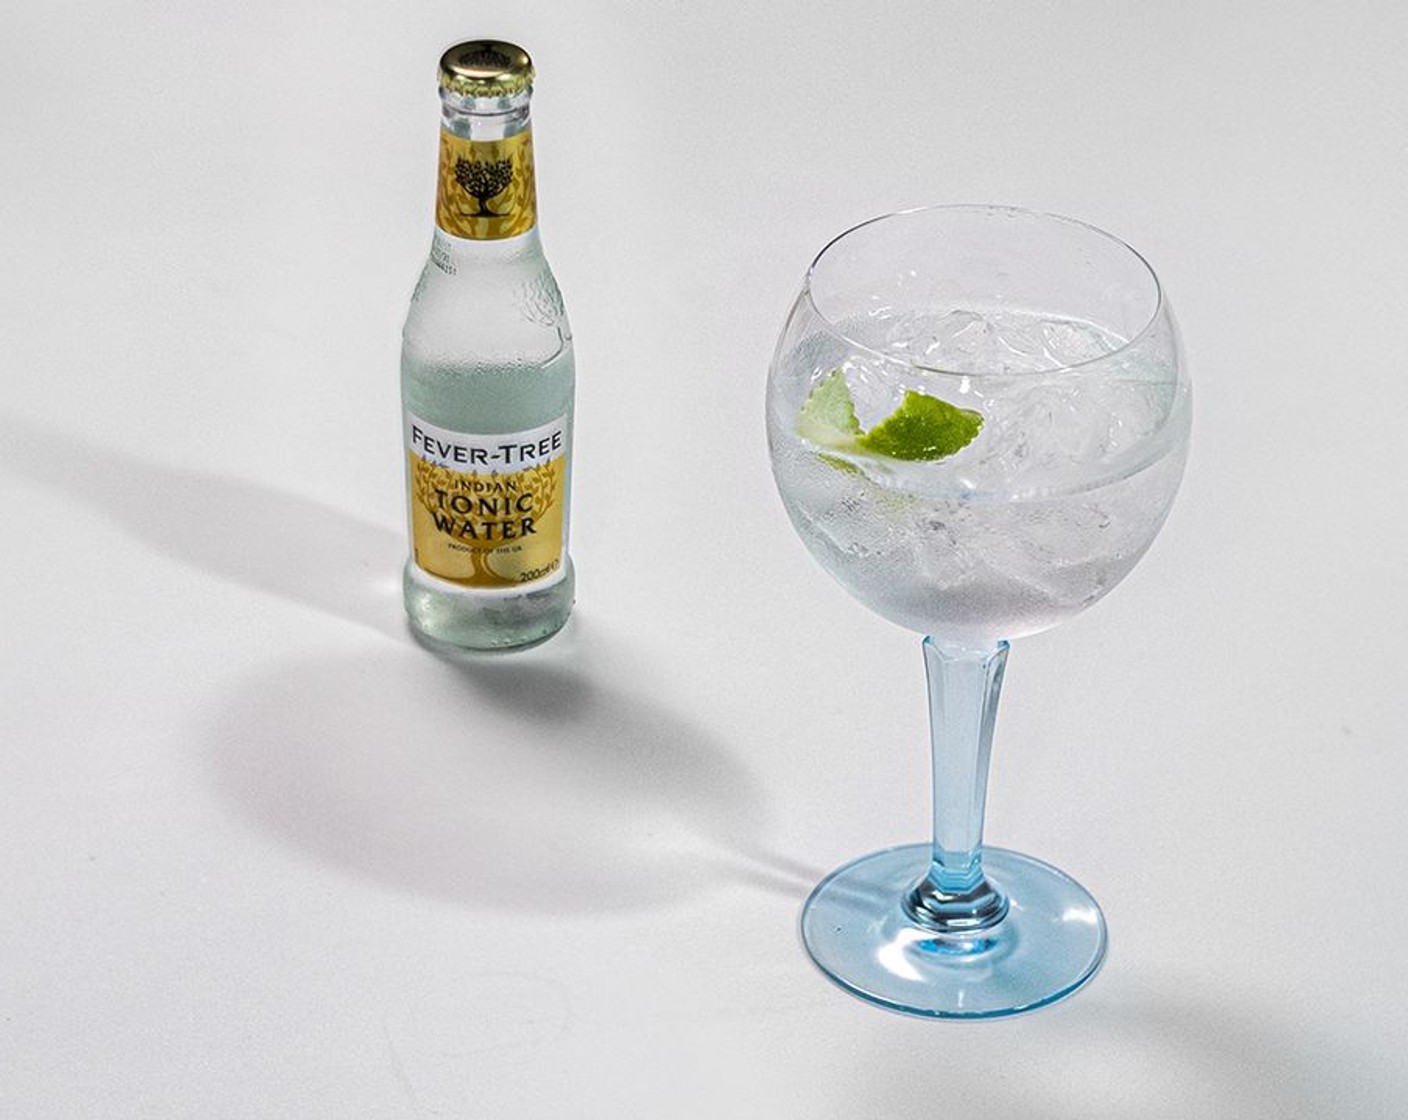 Fever Tree Gin and Tonic